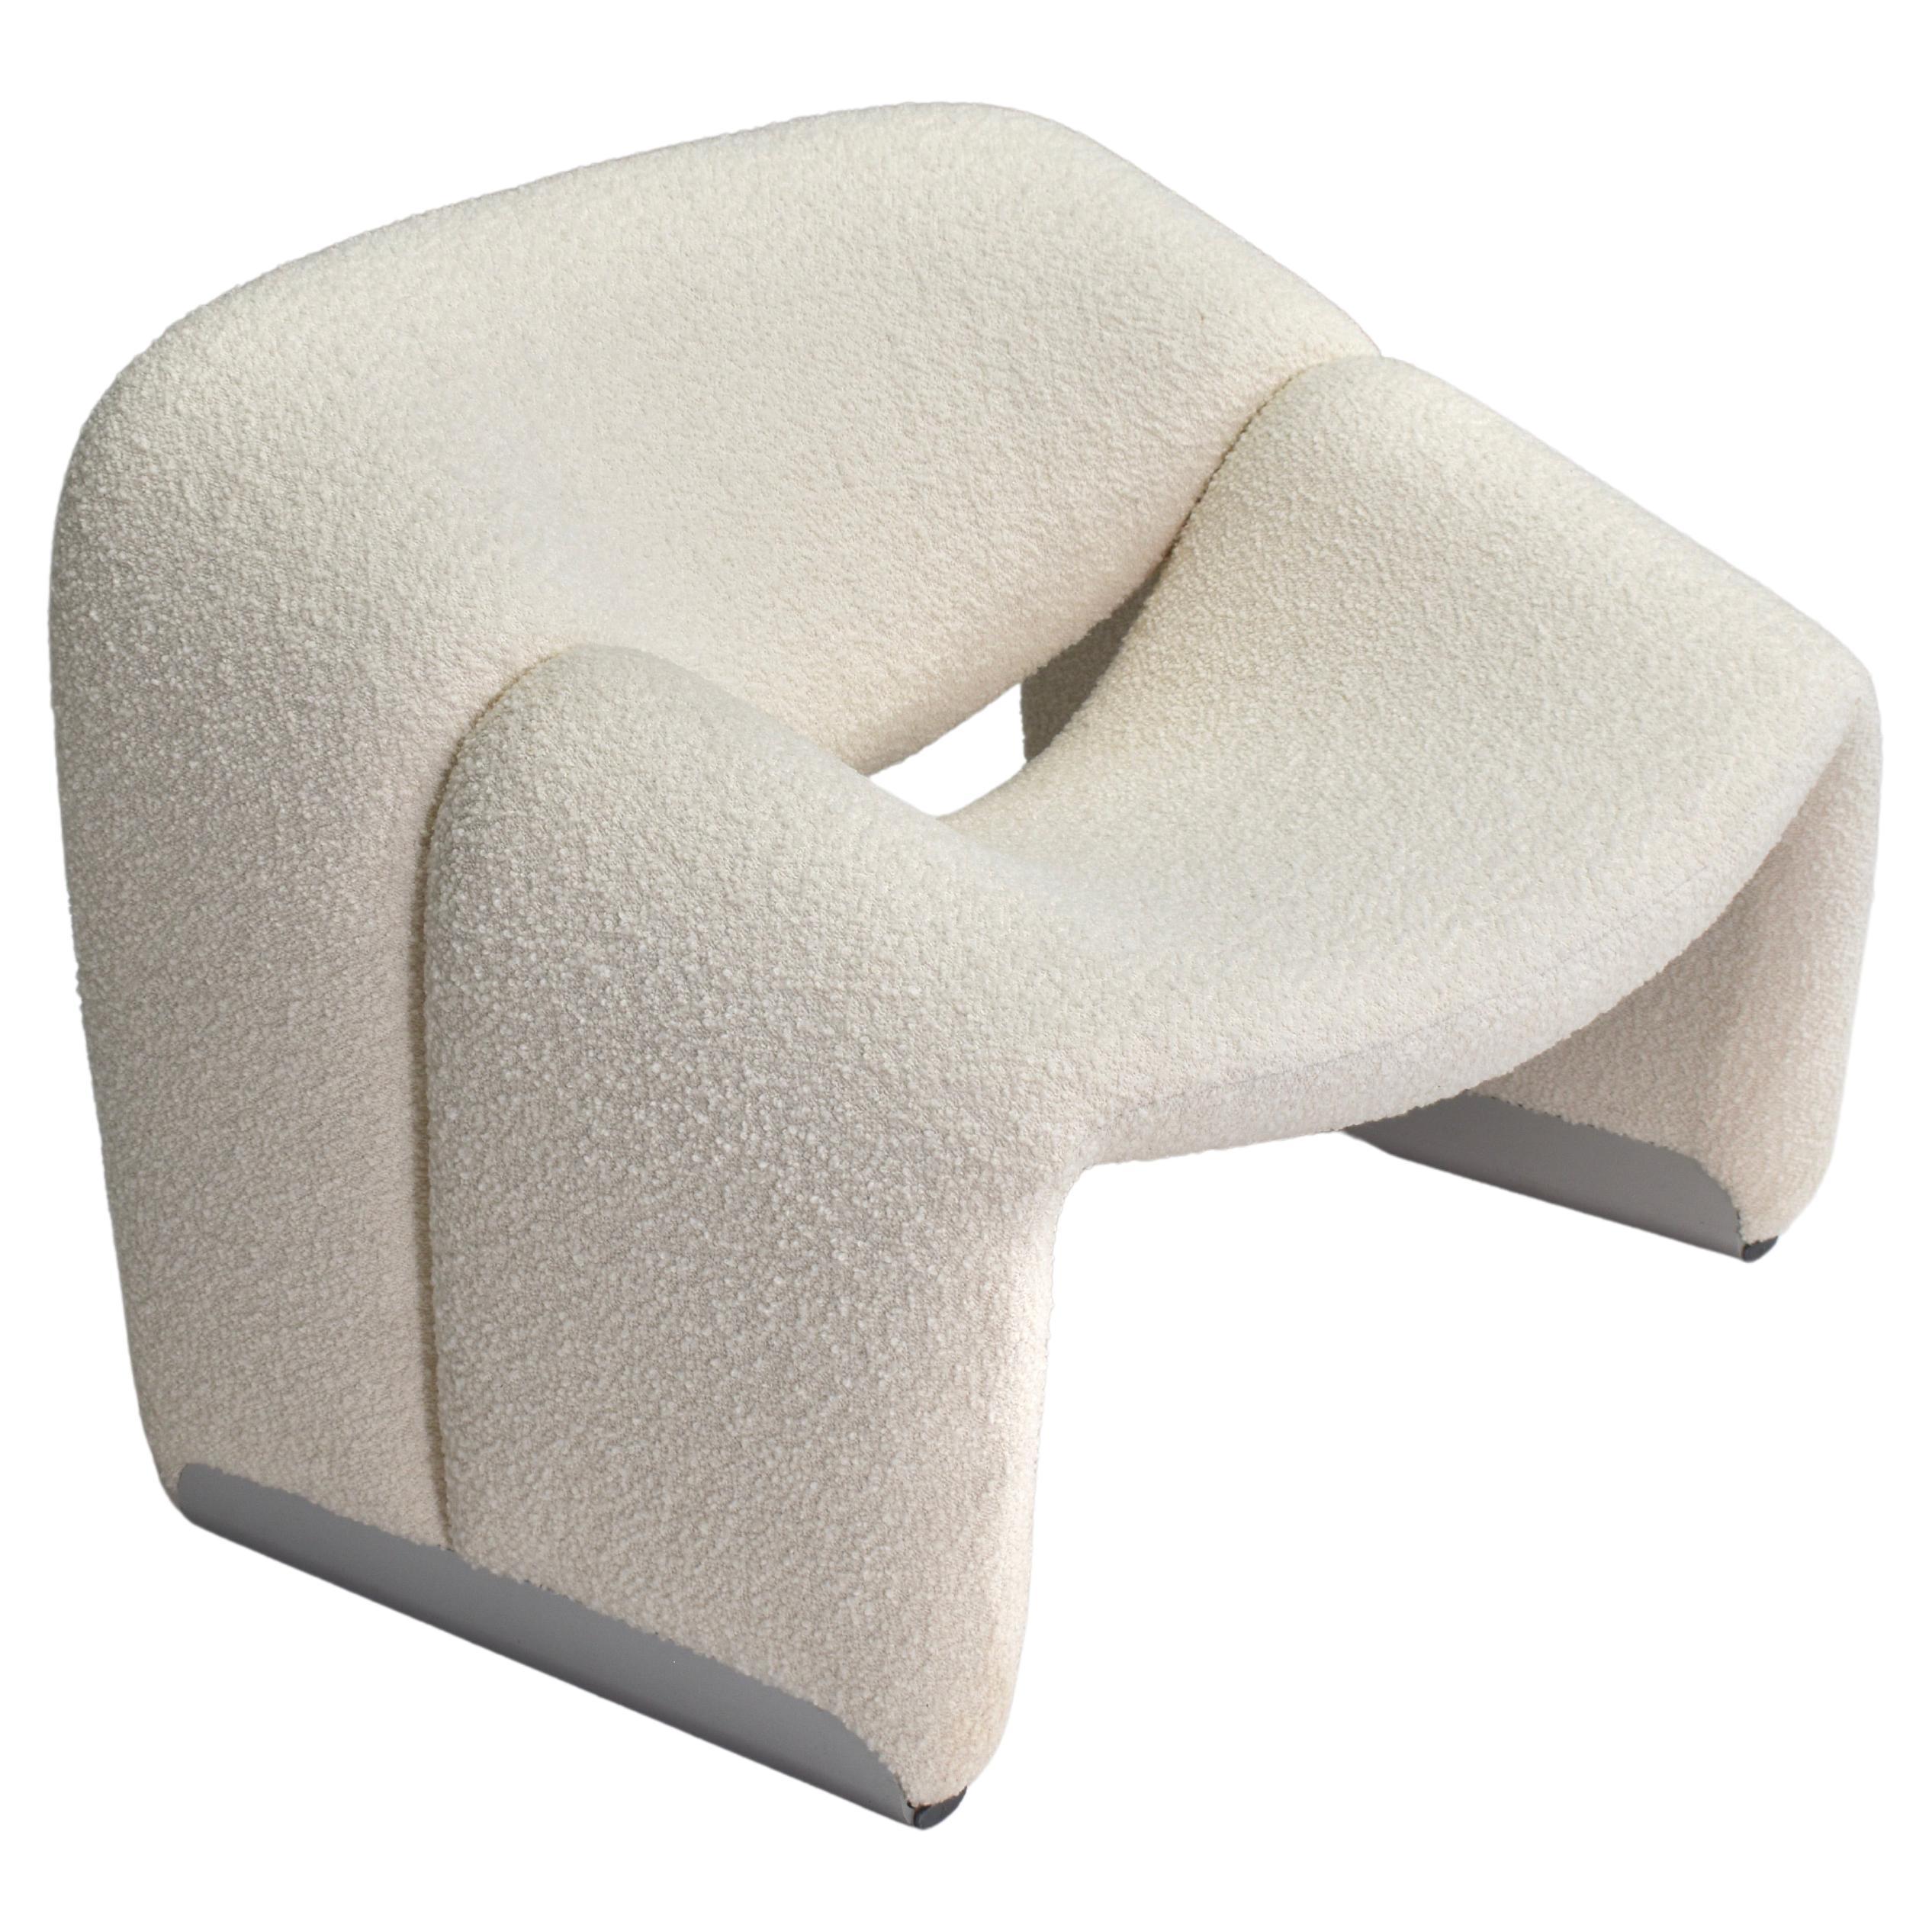 Pierre Paulin F598 Groovy Armchair for Artifort New Upholstery Netherlands, 1972 For Sale